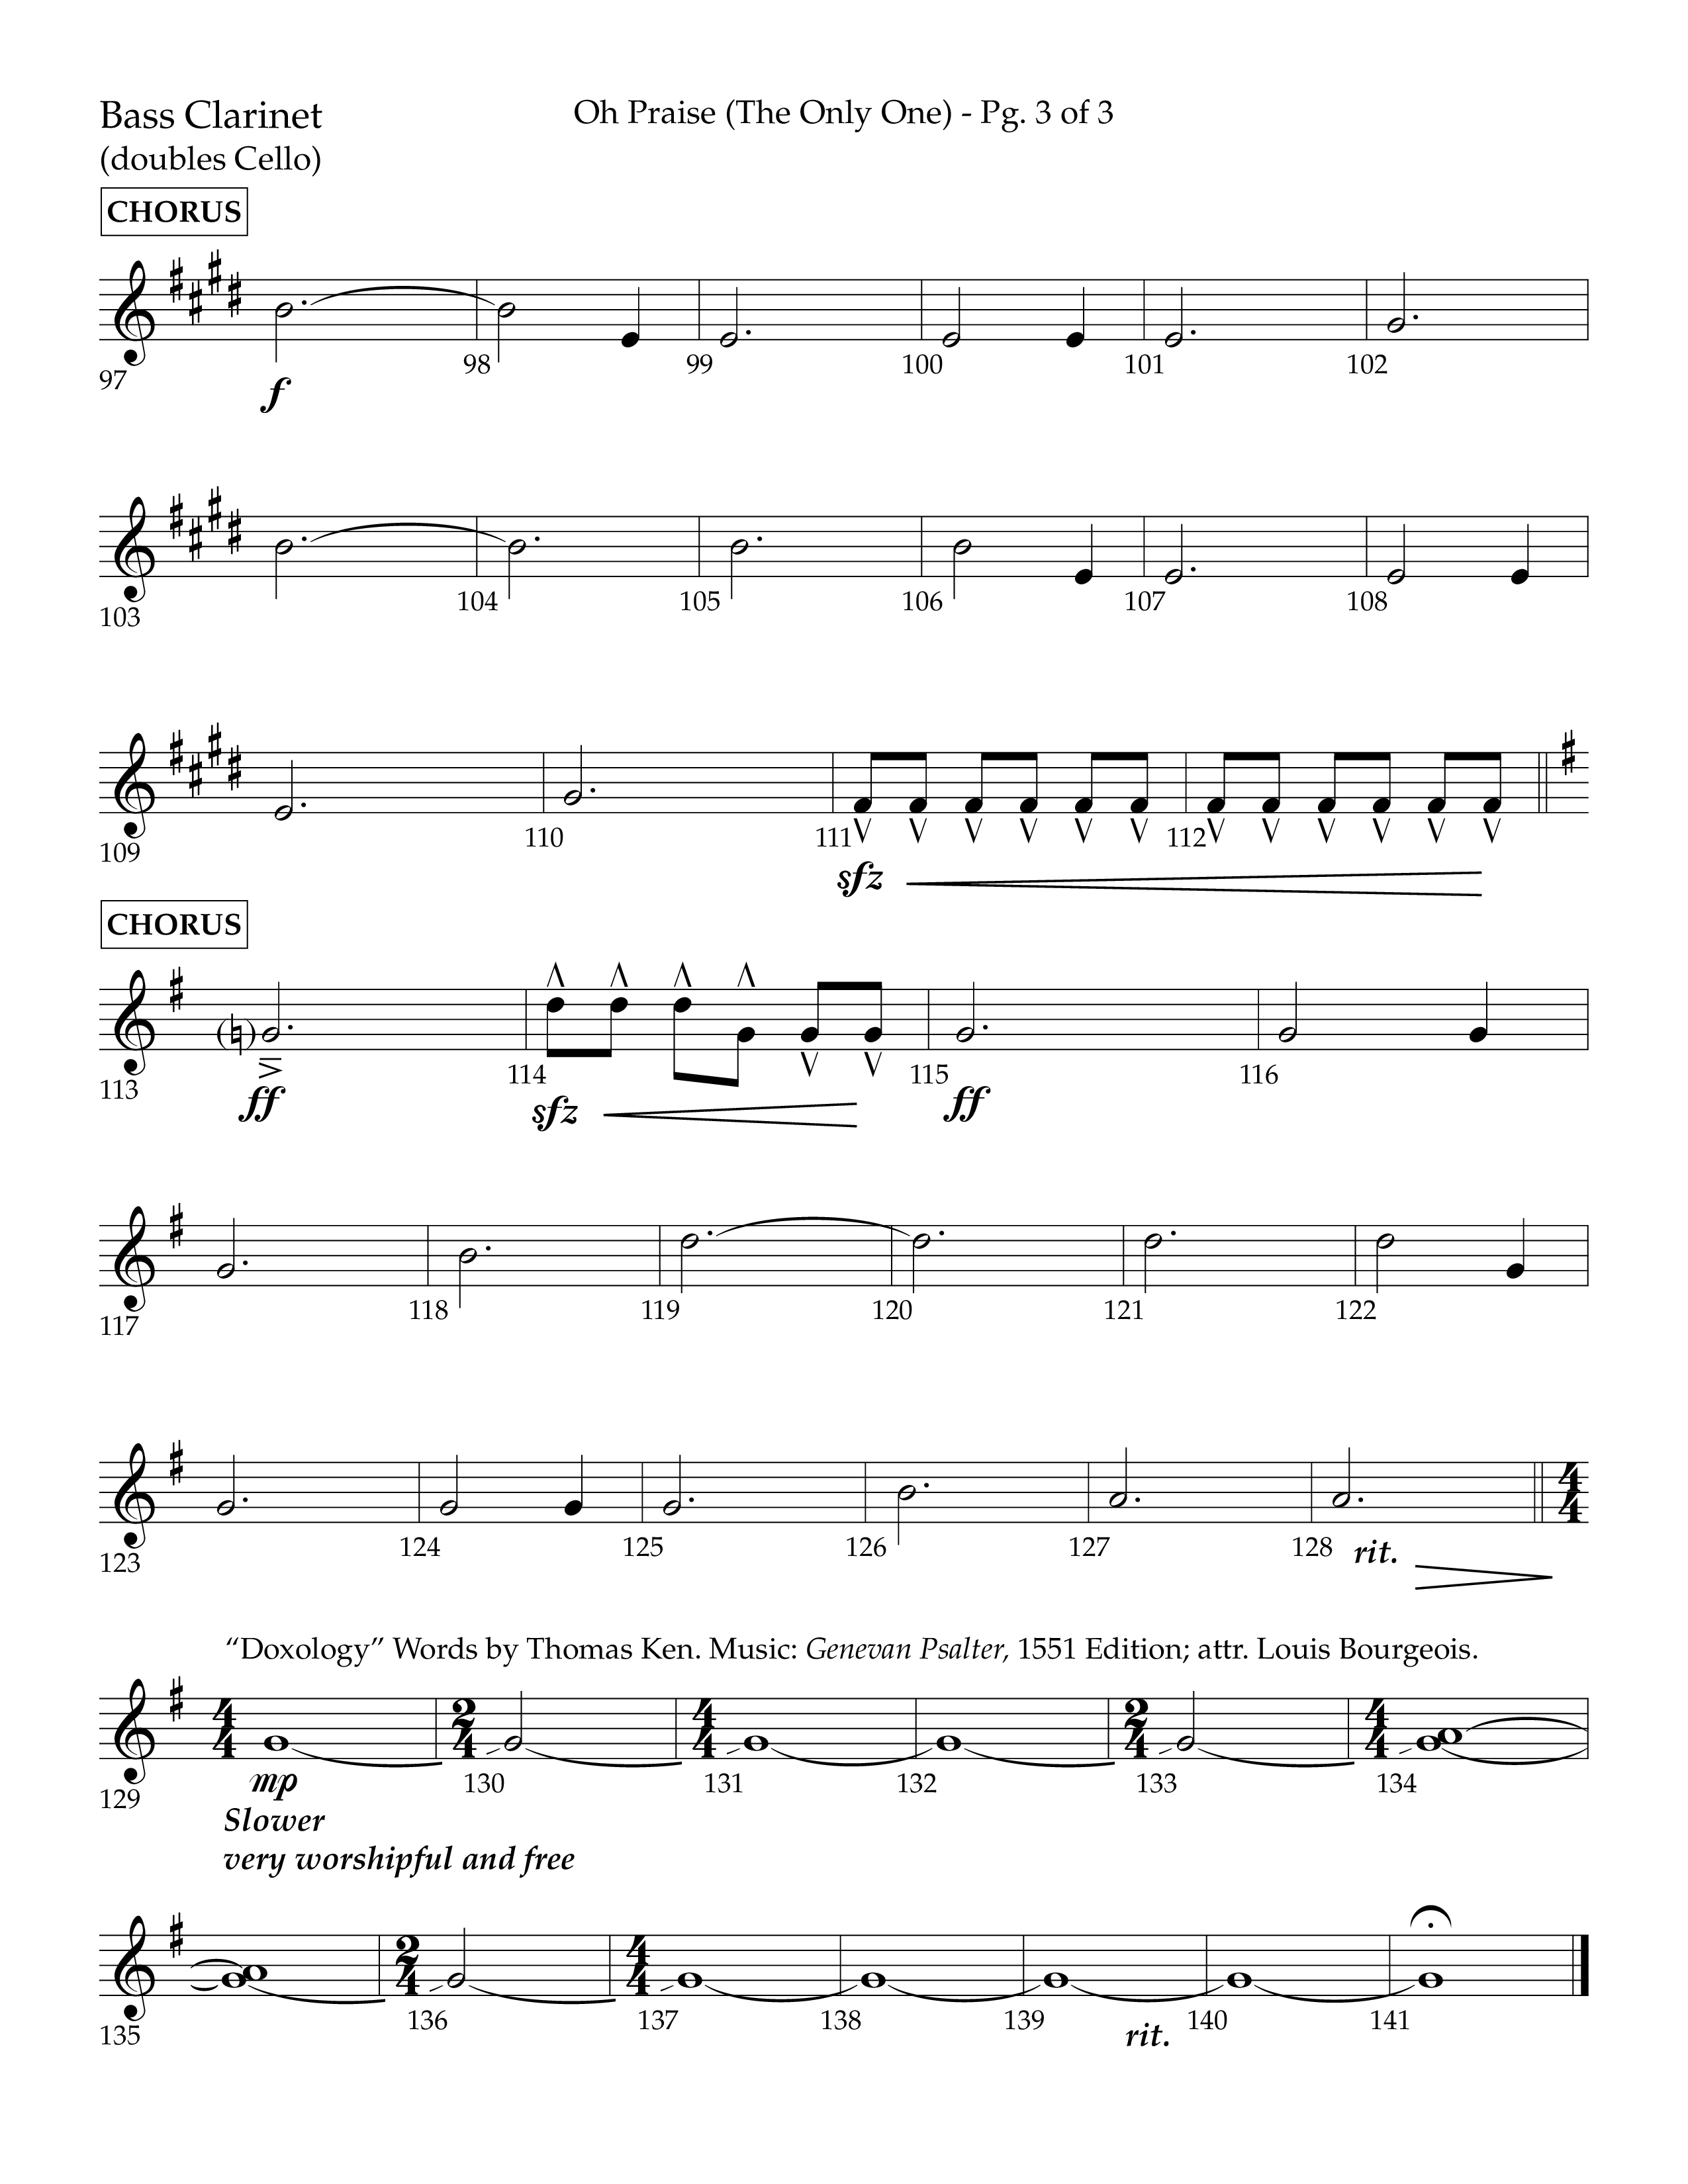 Oh Praise (The Only One) with Doxology (Choral Anthem SATB) Bass Clarinet (Lifeway Choral / Arr. John Bolin / Orch. Cliff Duren)